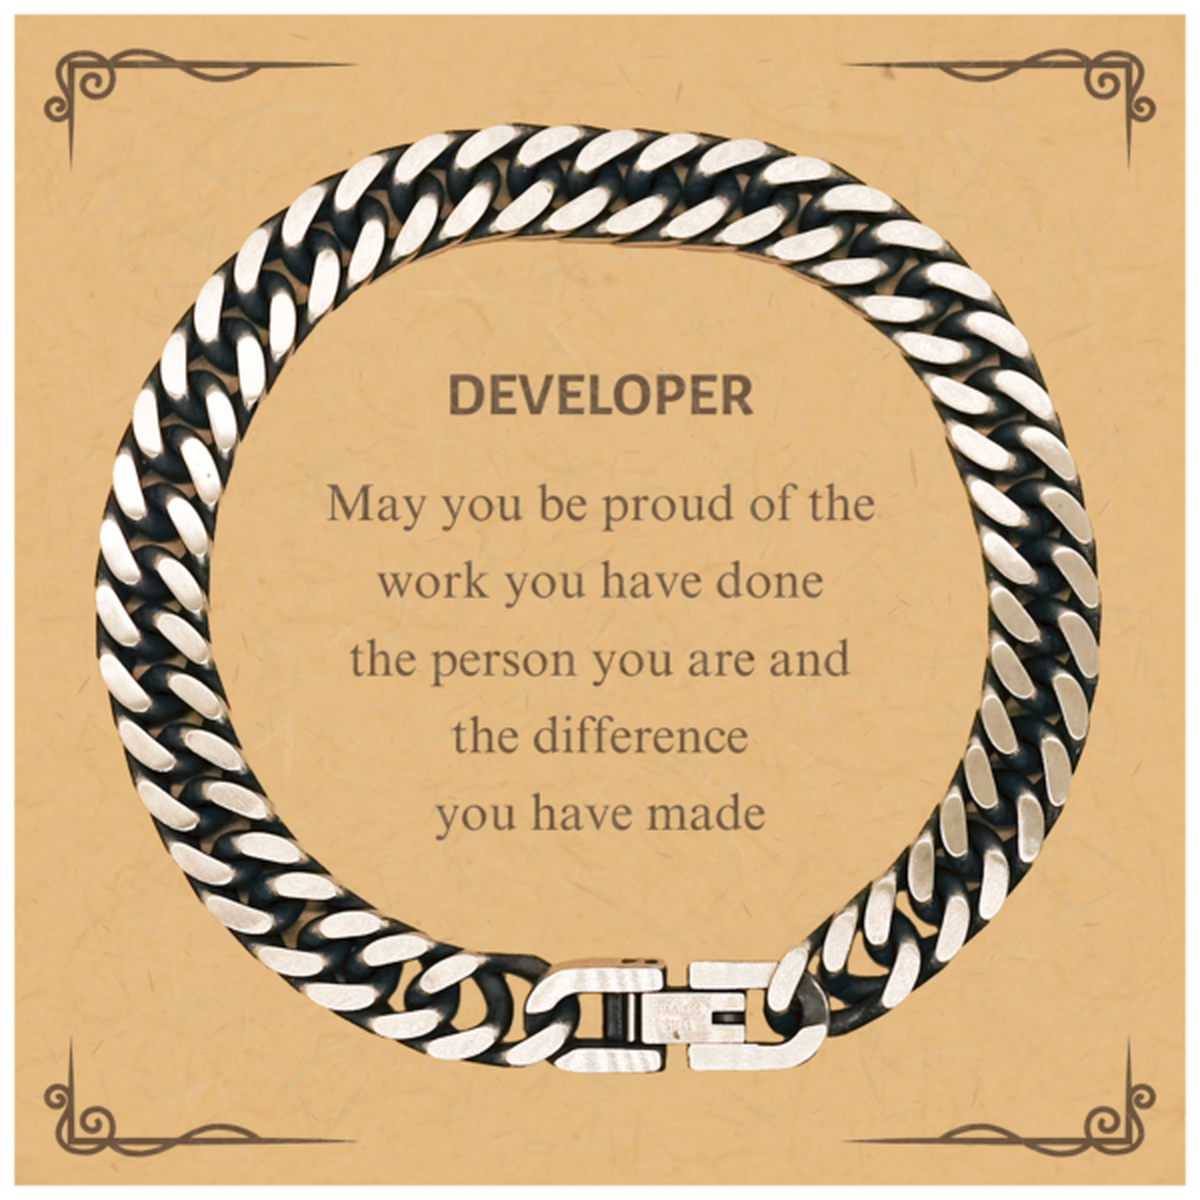 Developer May you be proud of the work you have done, Retirement Developer Cuban Link Chain Bracelet for Colleague Appreciation Gifts Amazing for Developer